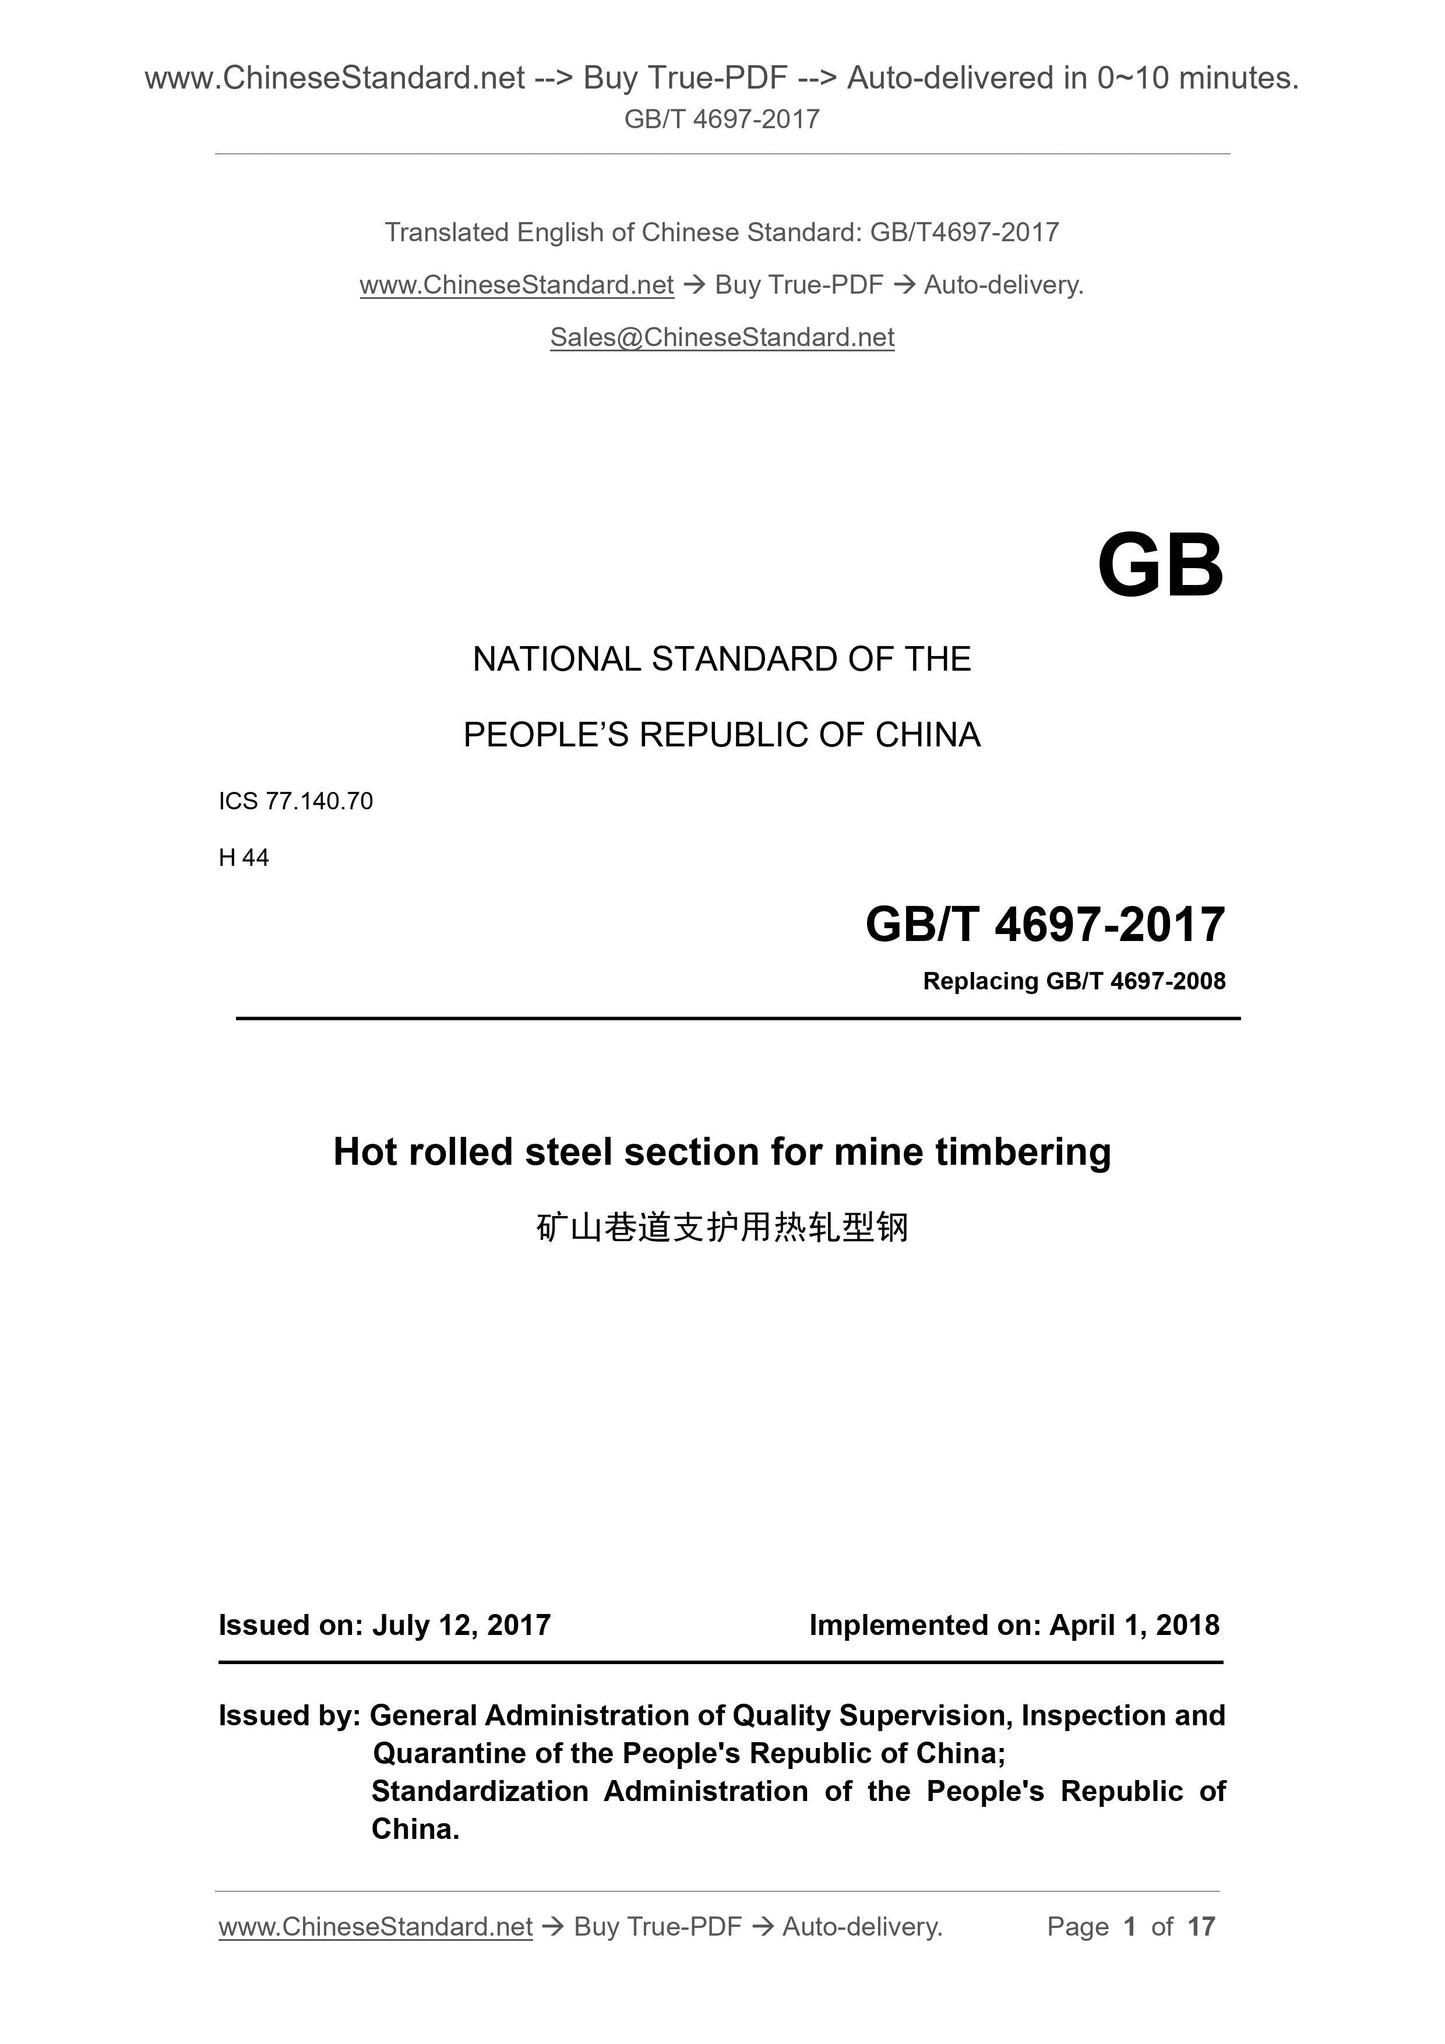 GB/T 4697-2017 Page 1